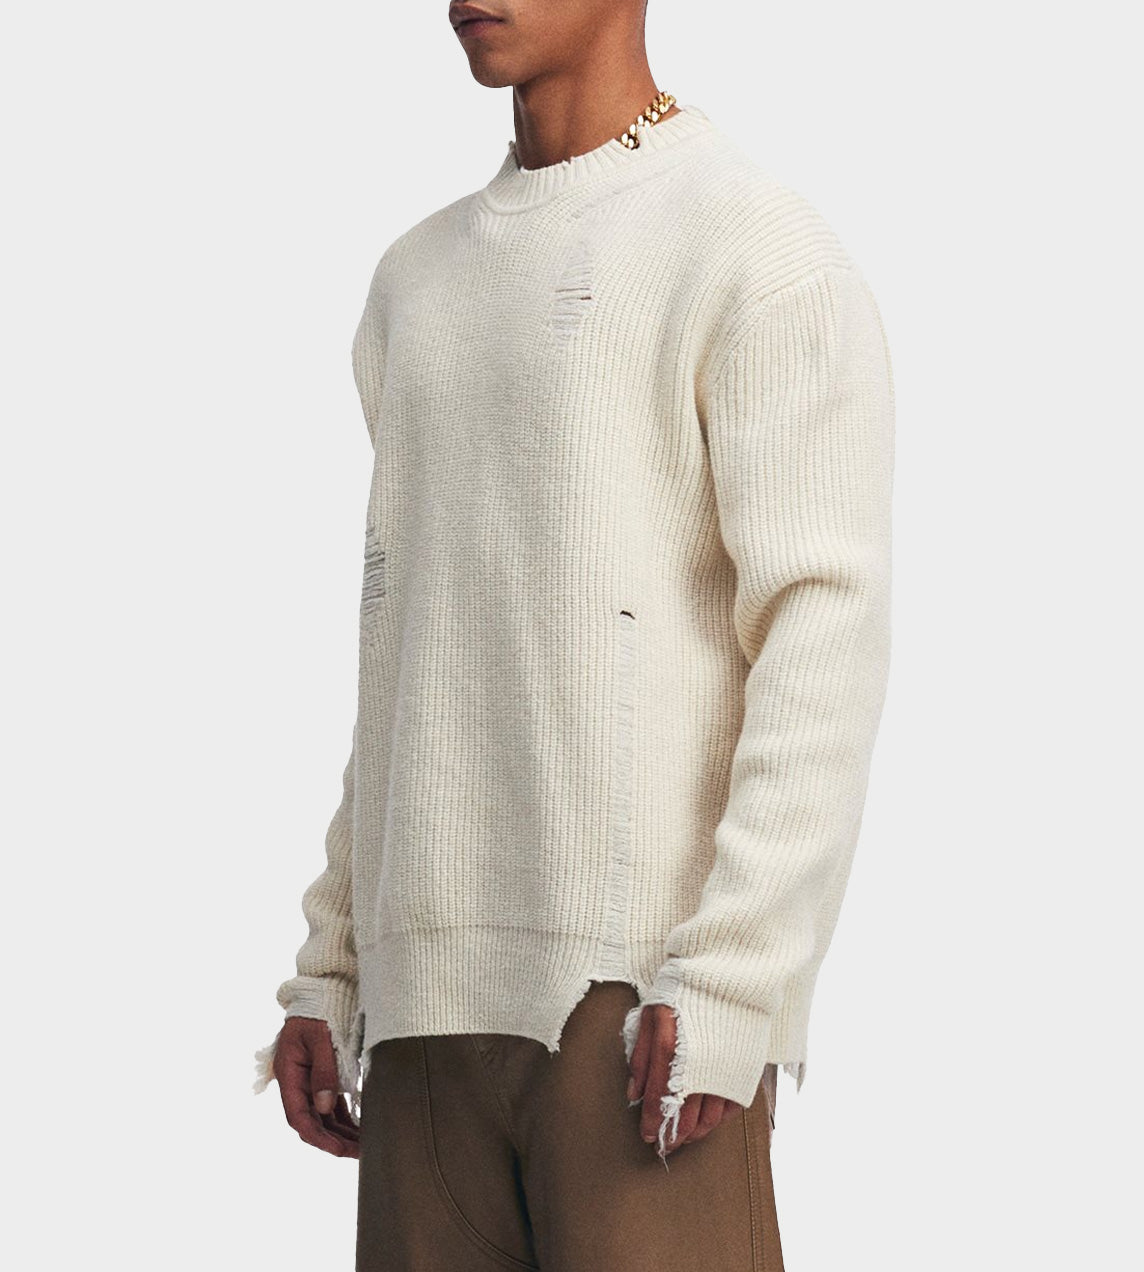 Destroyed Knit Top Ivory